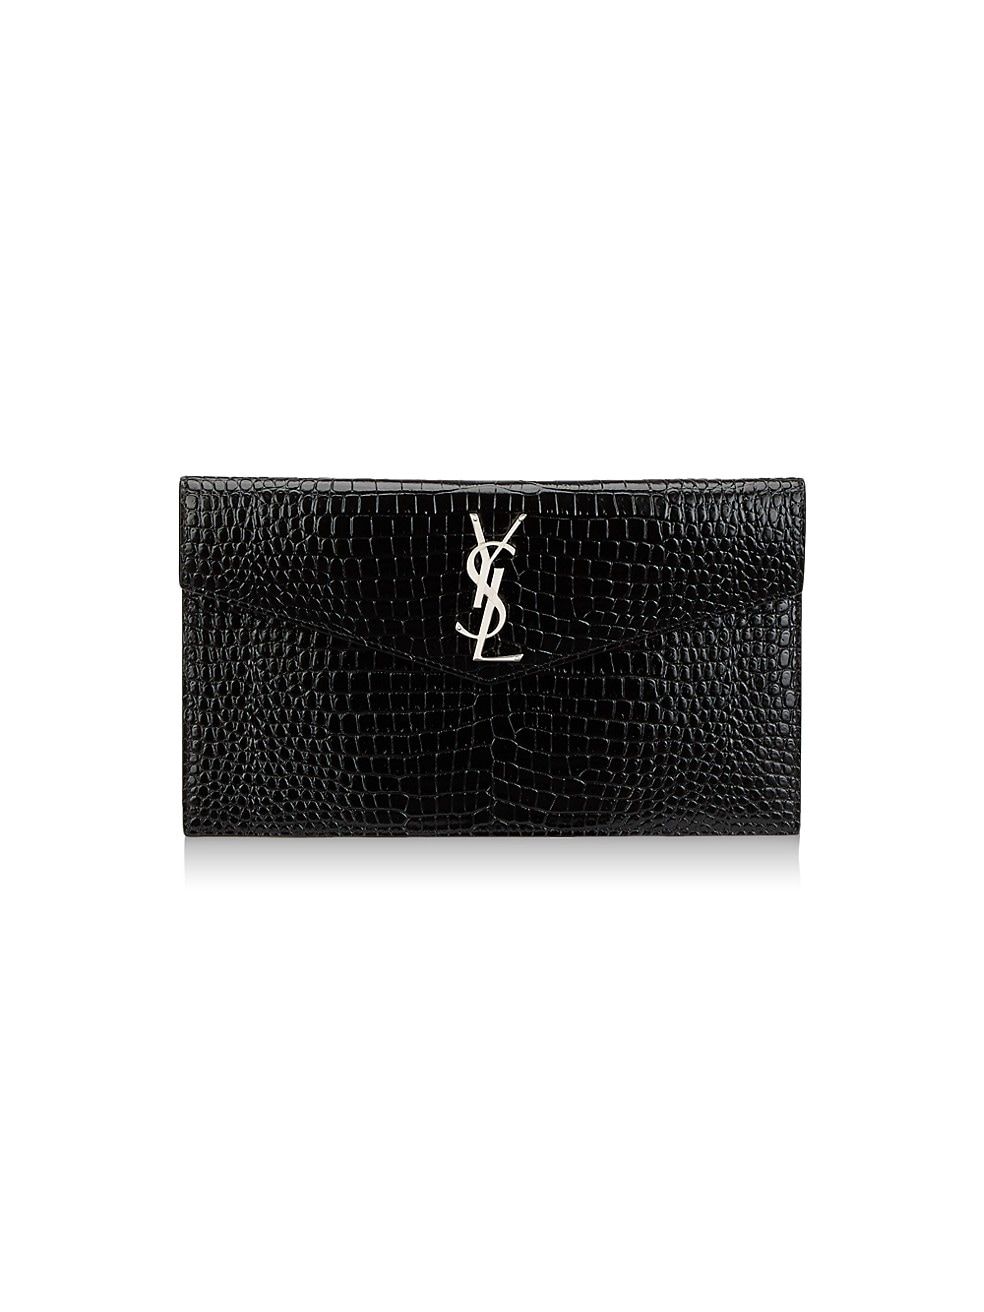 Saint Laurent Uptown Pouch In Crocodile Embossed Shiny Leather | Saks Fifth Avenue